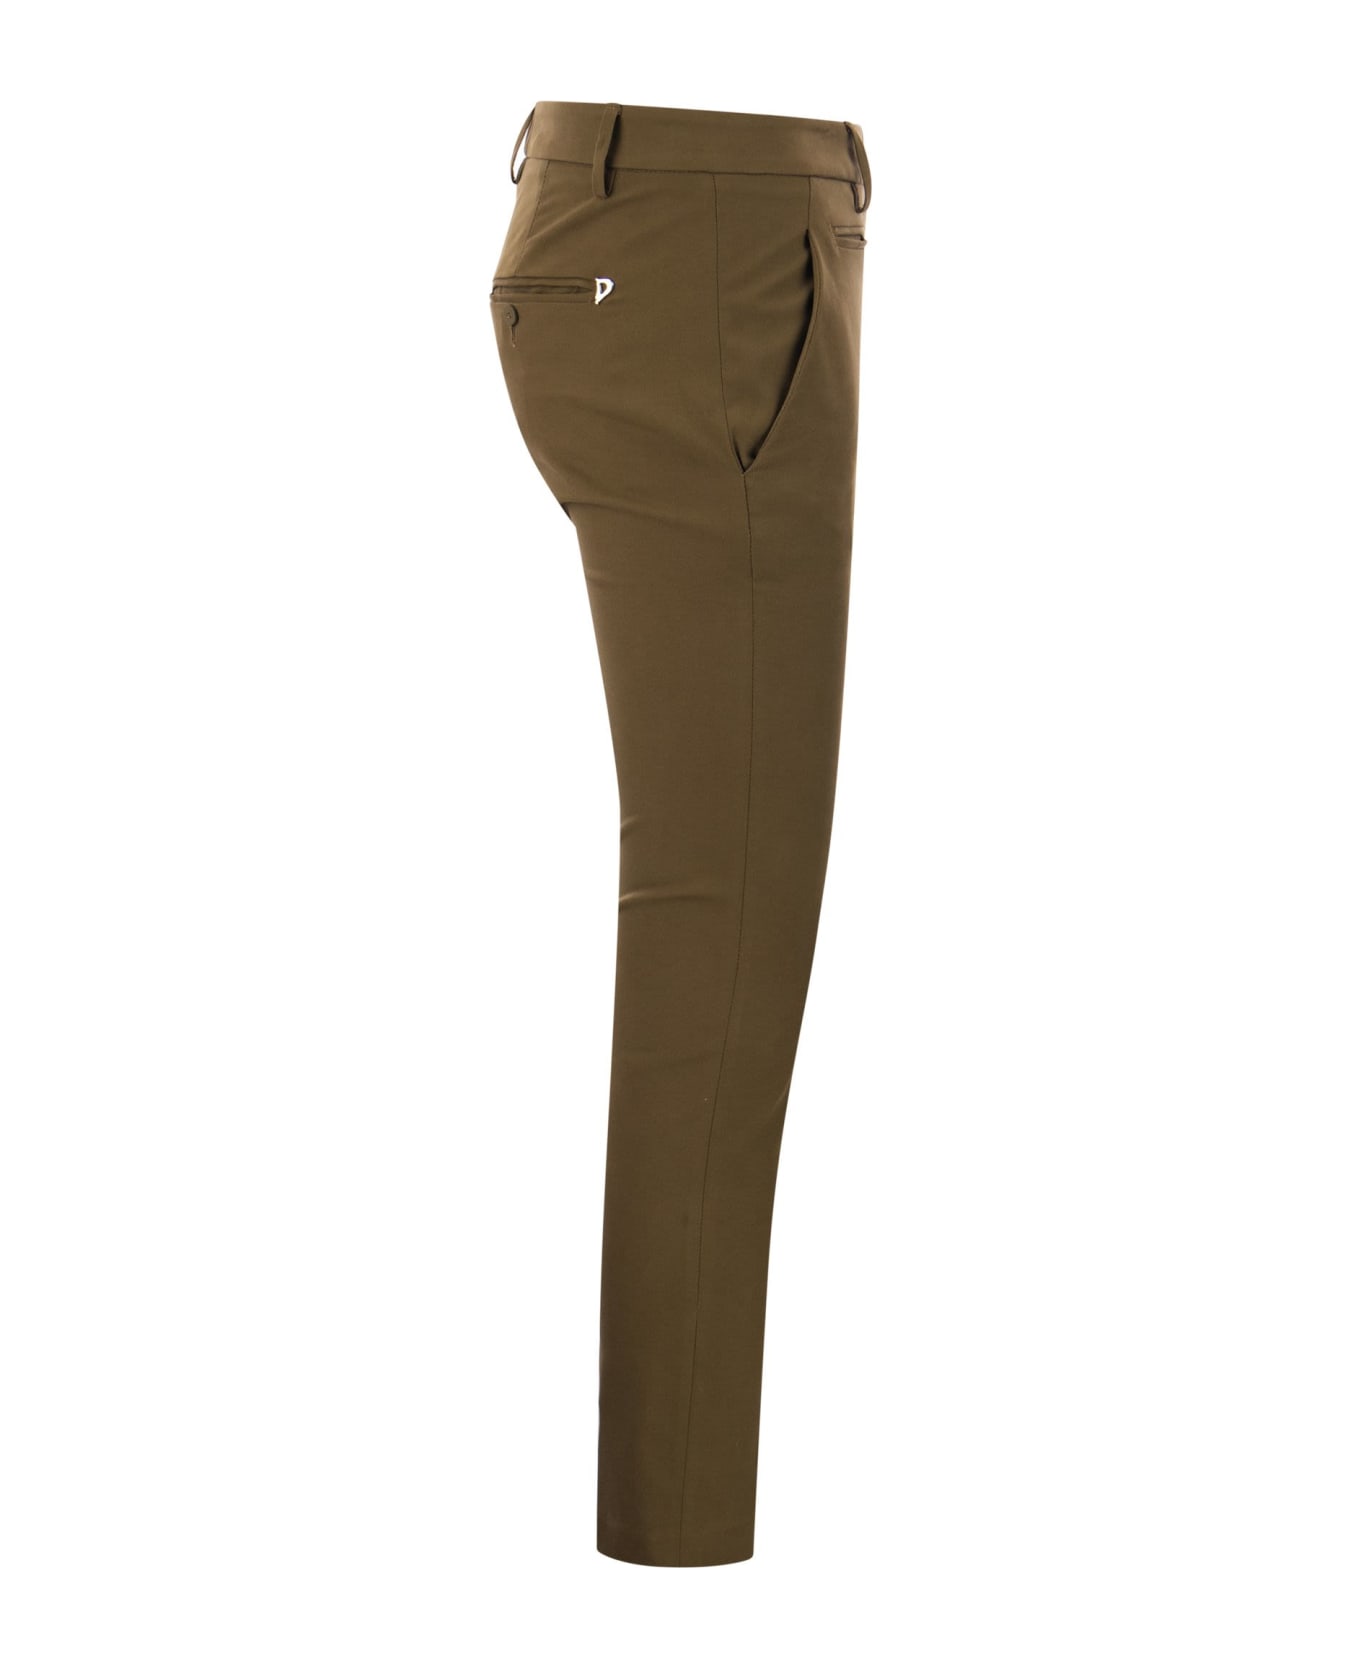 Dondup Perfect - Slim Fit Stretch Trousers - Green